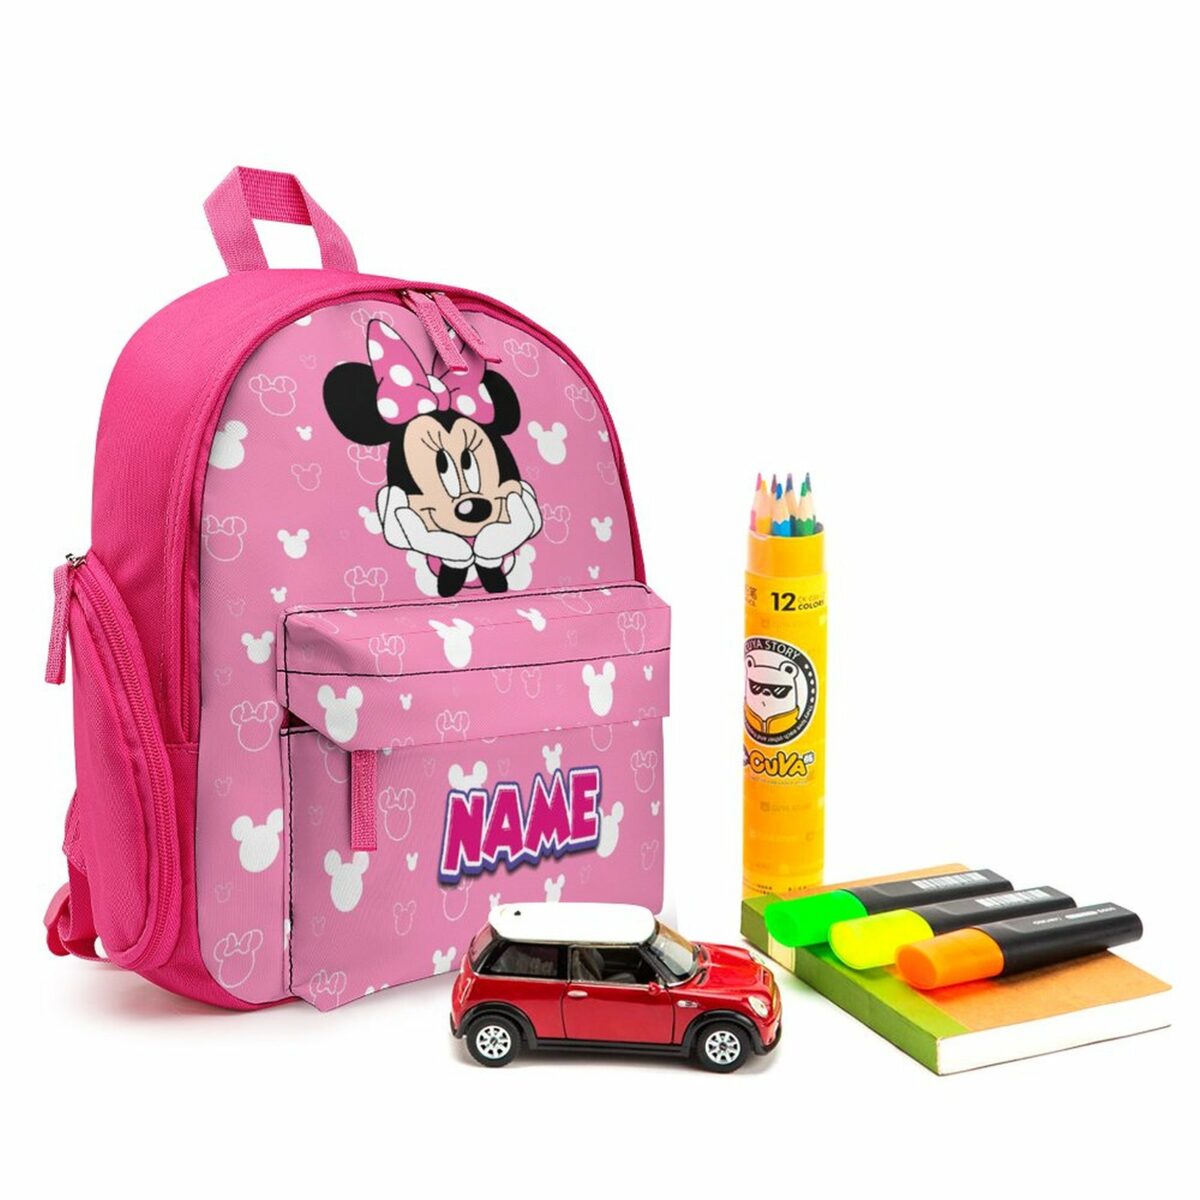 Personalized Minnie Mouse Children’s School Bag – Toddler’s Backpack Cool Kiddo 14